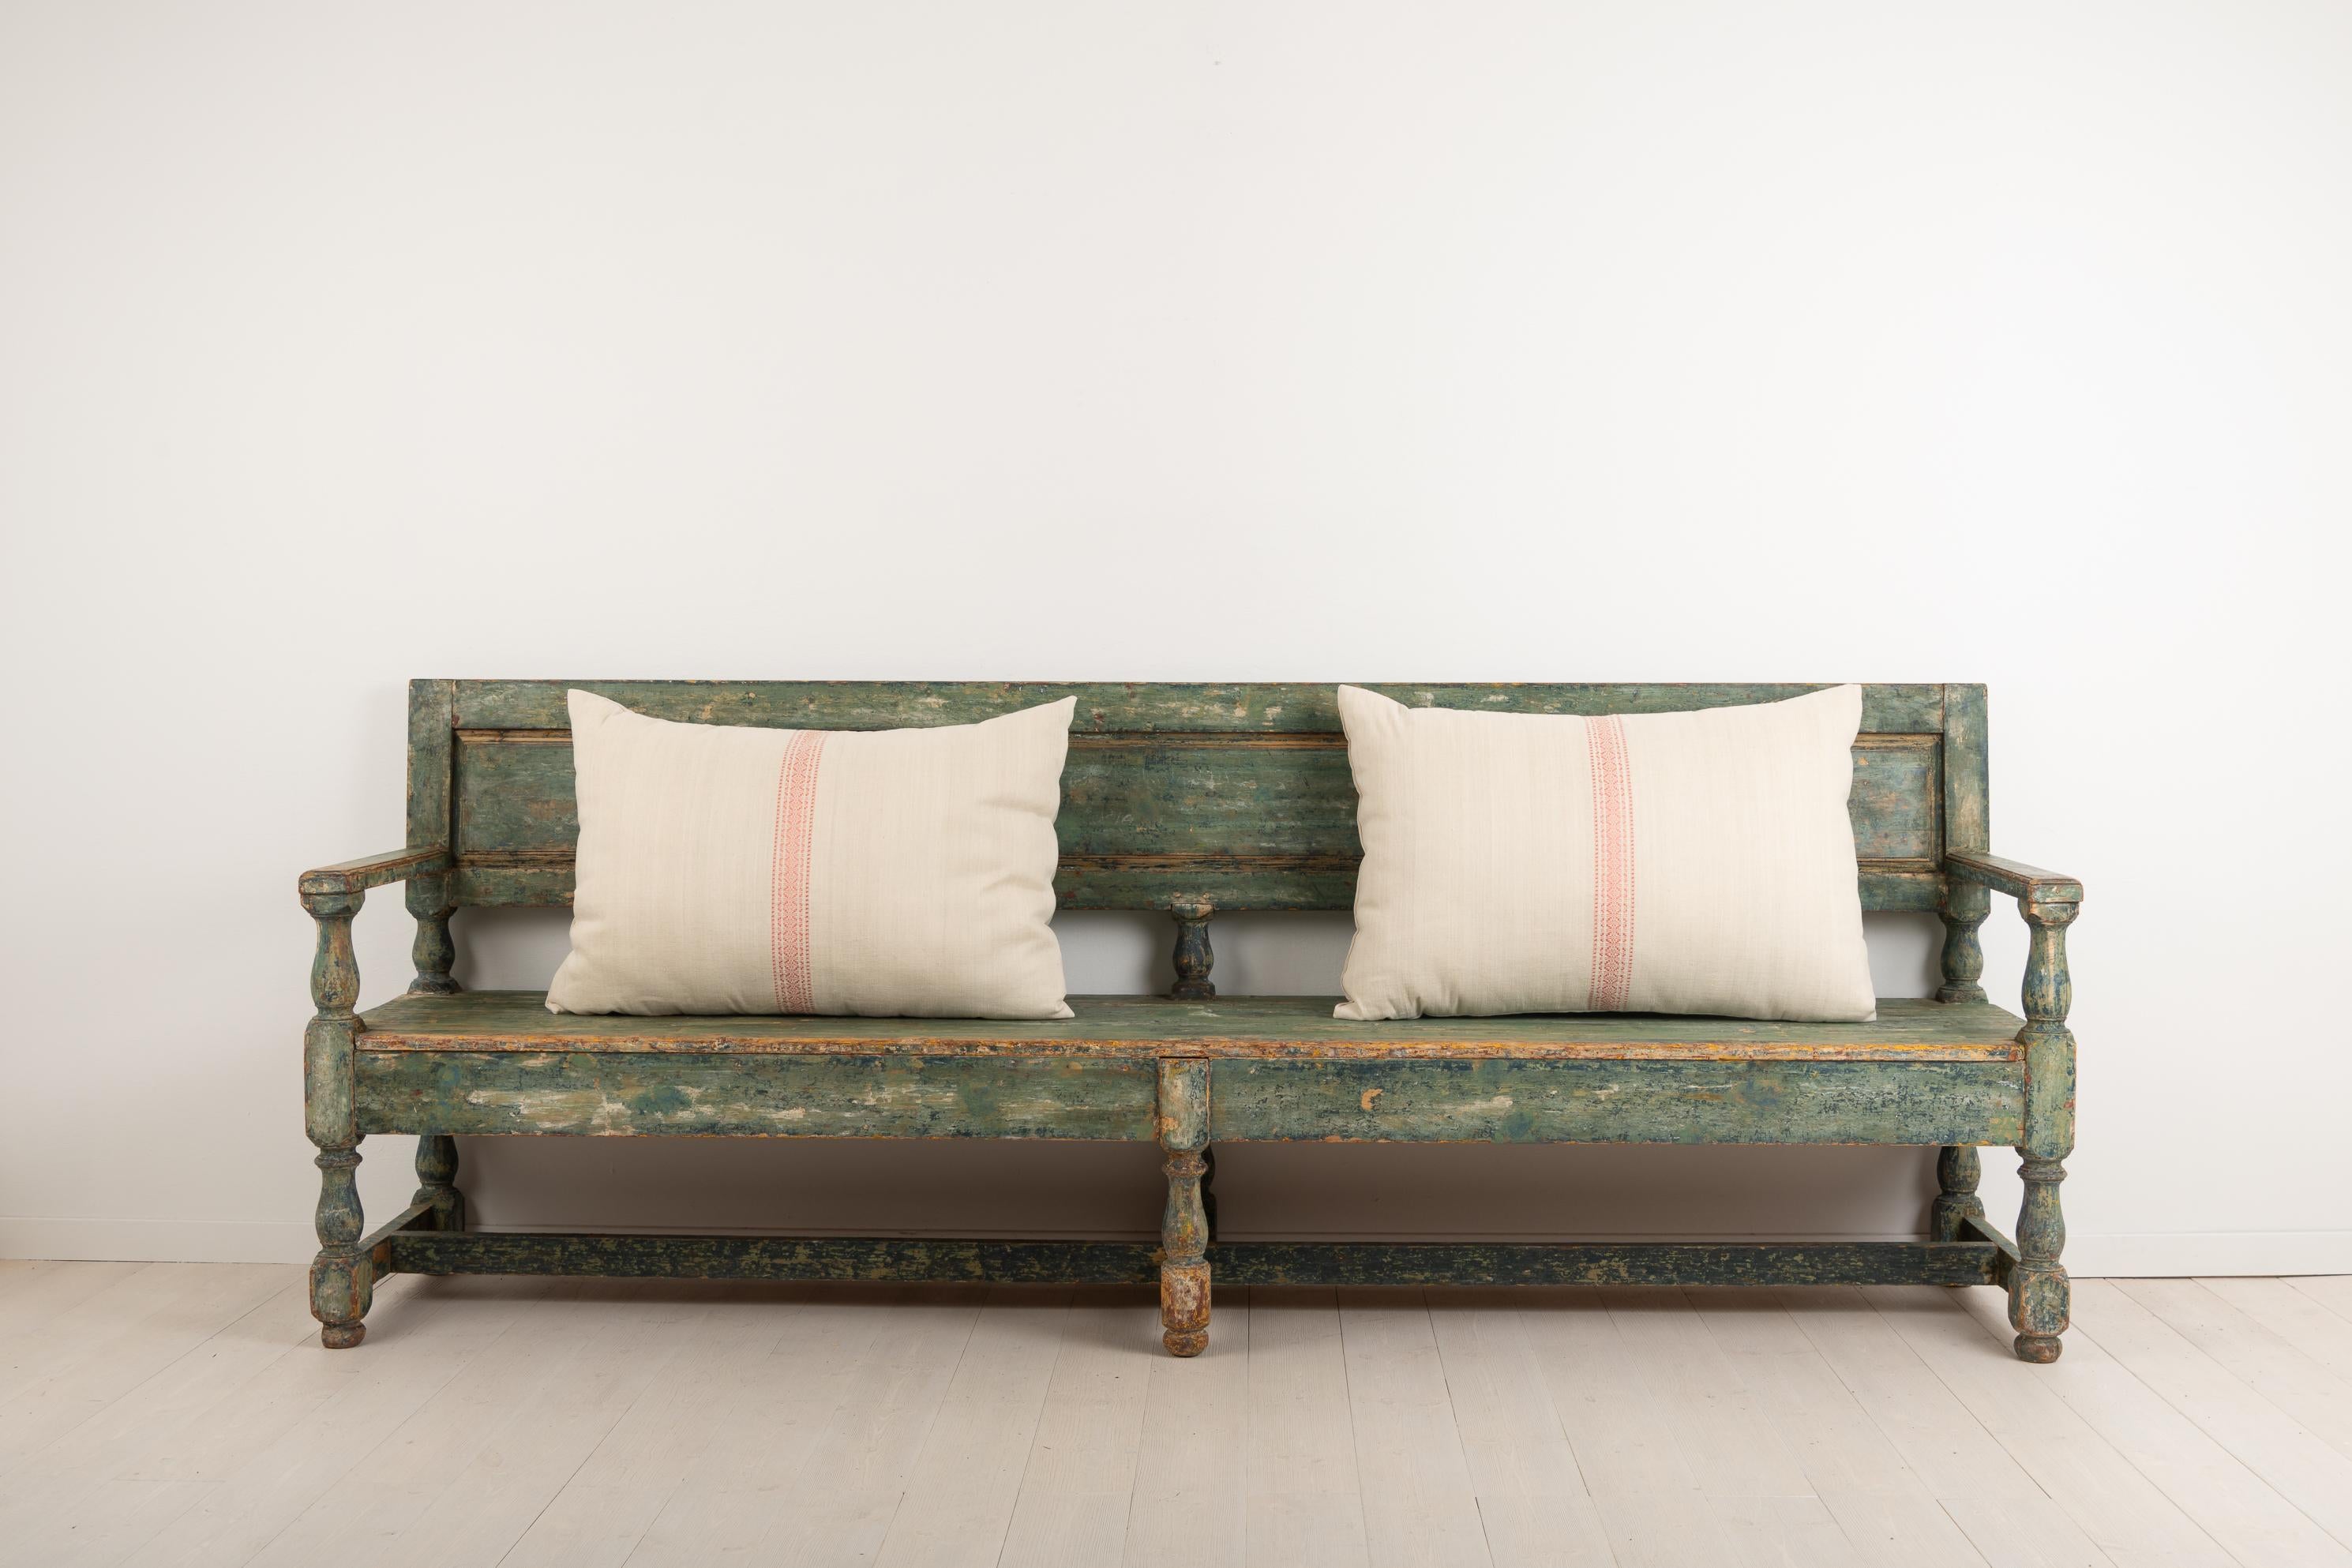 Swedish sofa bench in painted pine. The bench is Folk Art and made in Baroque style. The green paint is original and naturally distressed due to age and use. Originally from northern Sweden and made circa 1830. The bench is quite wide at just over 2